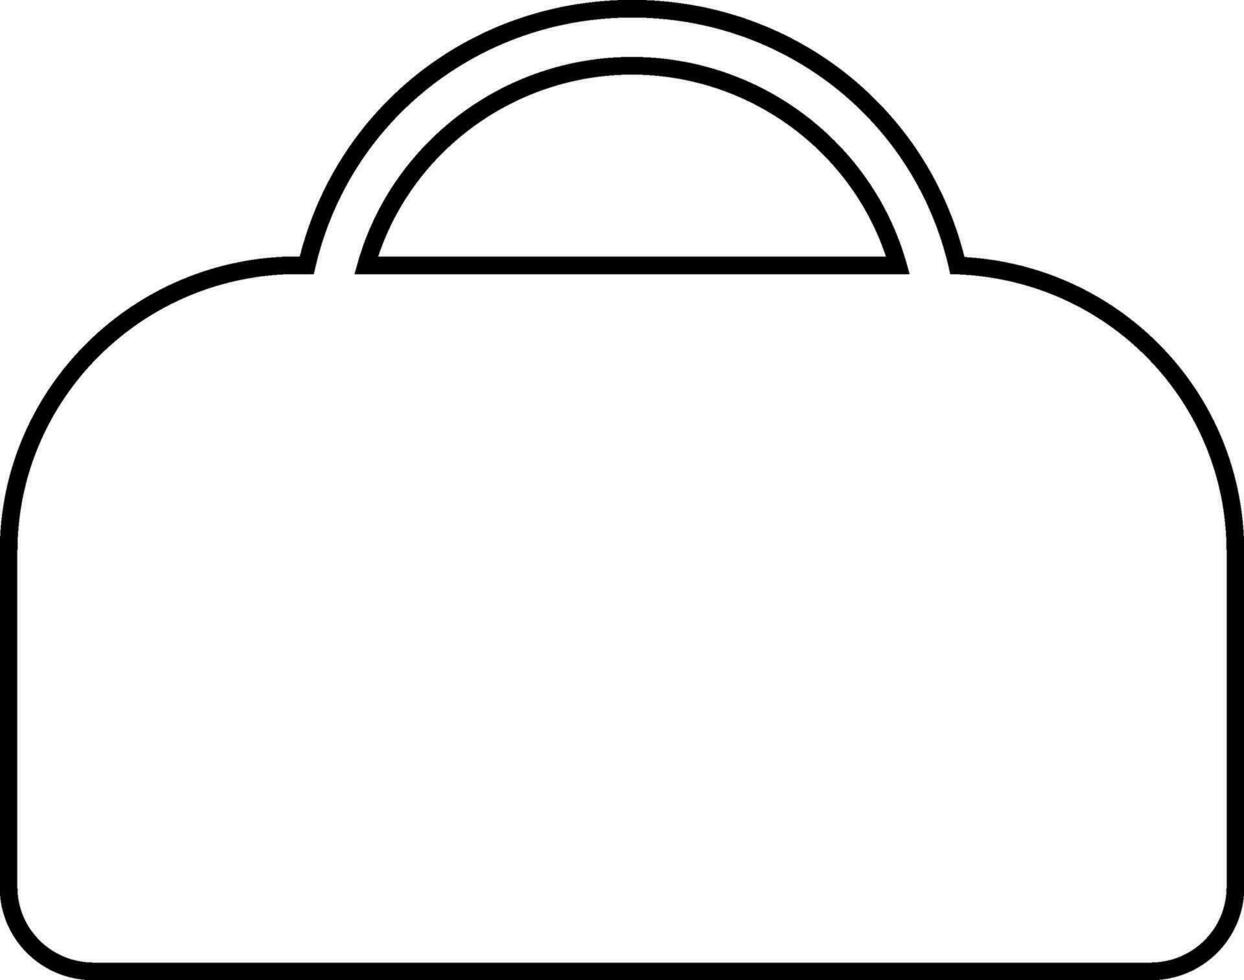 Illustration of flat style hand bag. vector